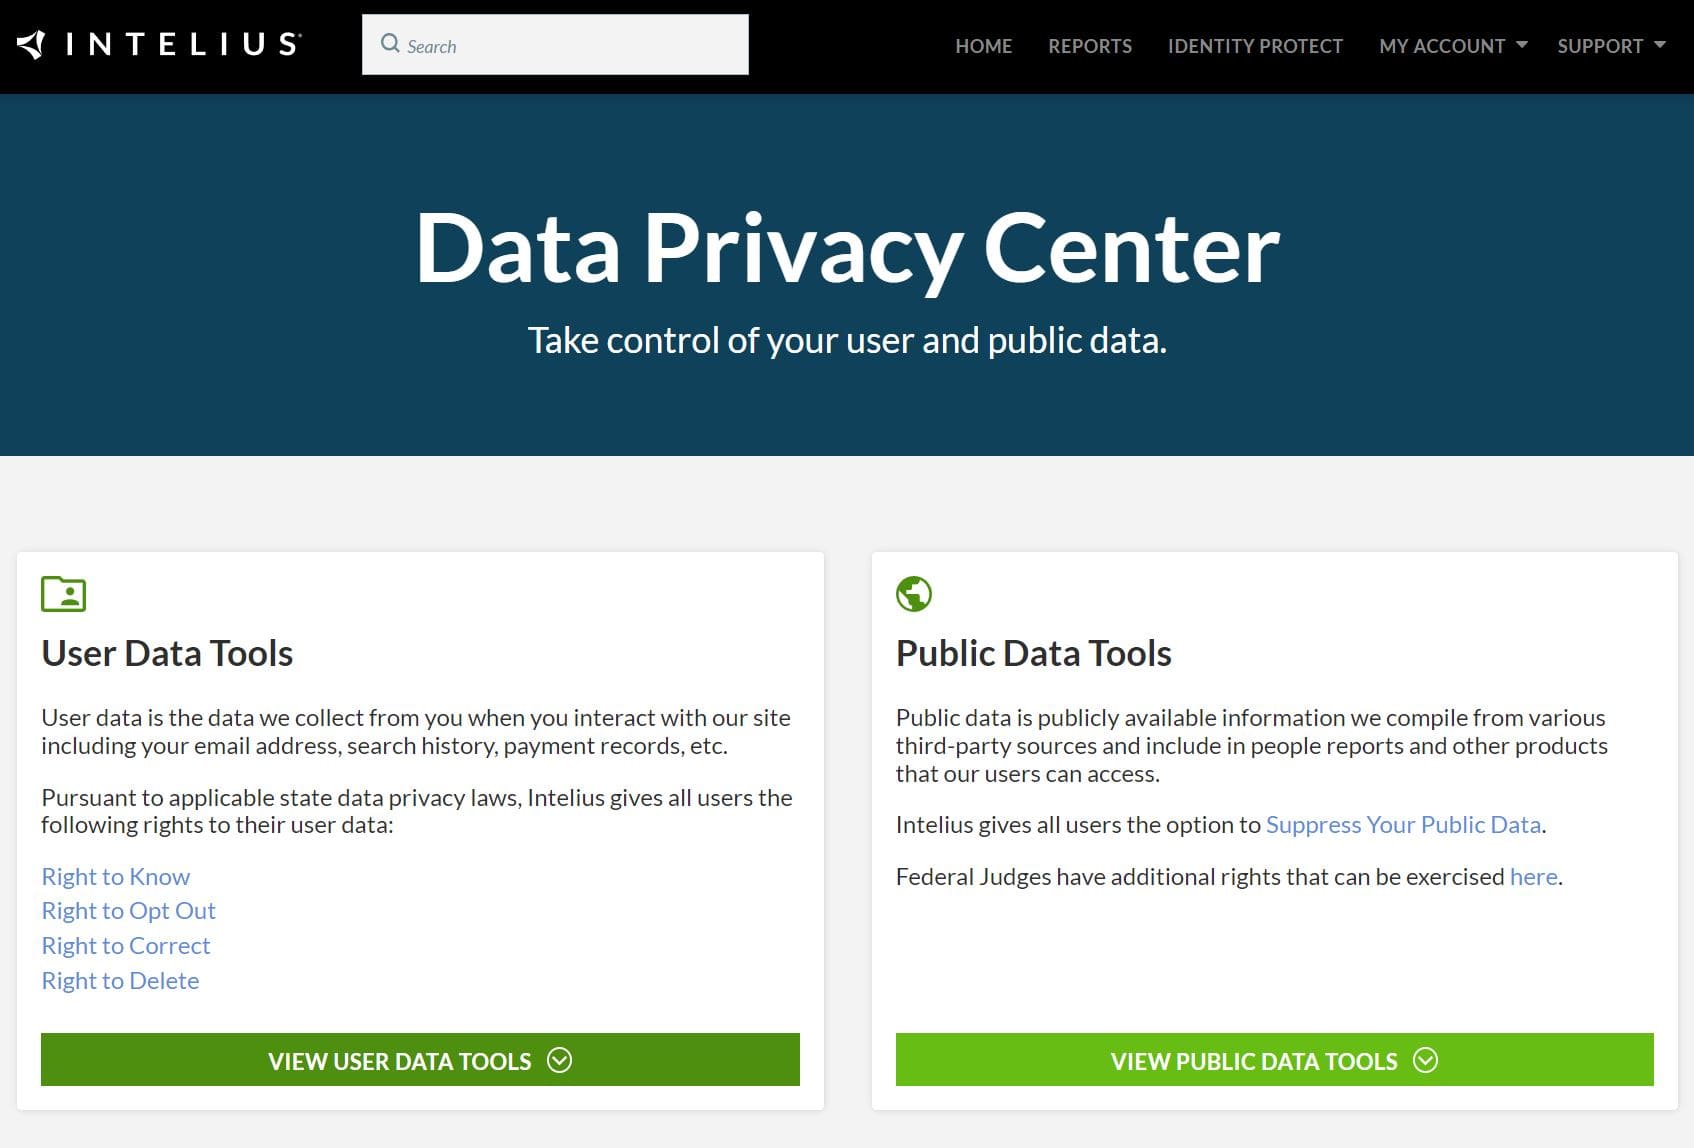 data privacy center at their website intelius